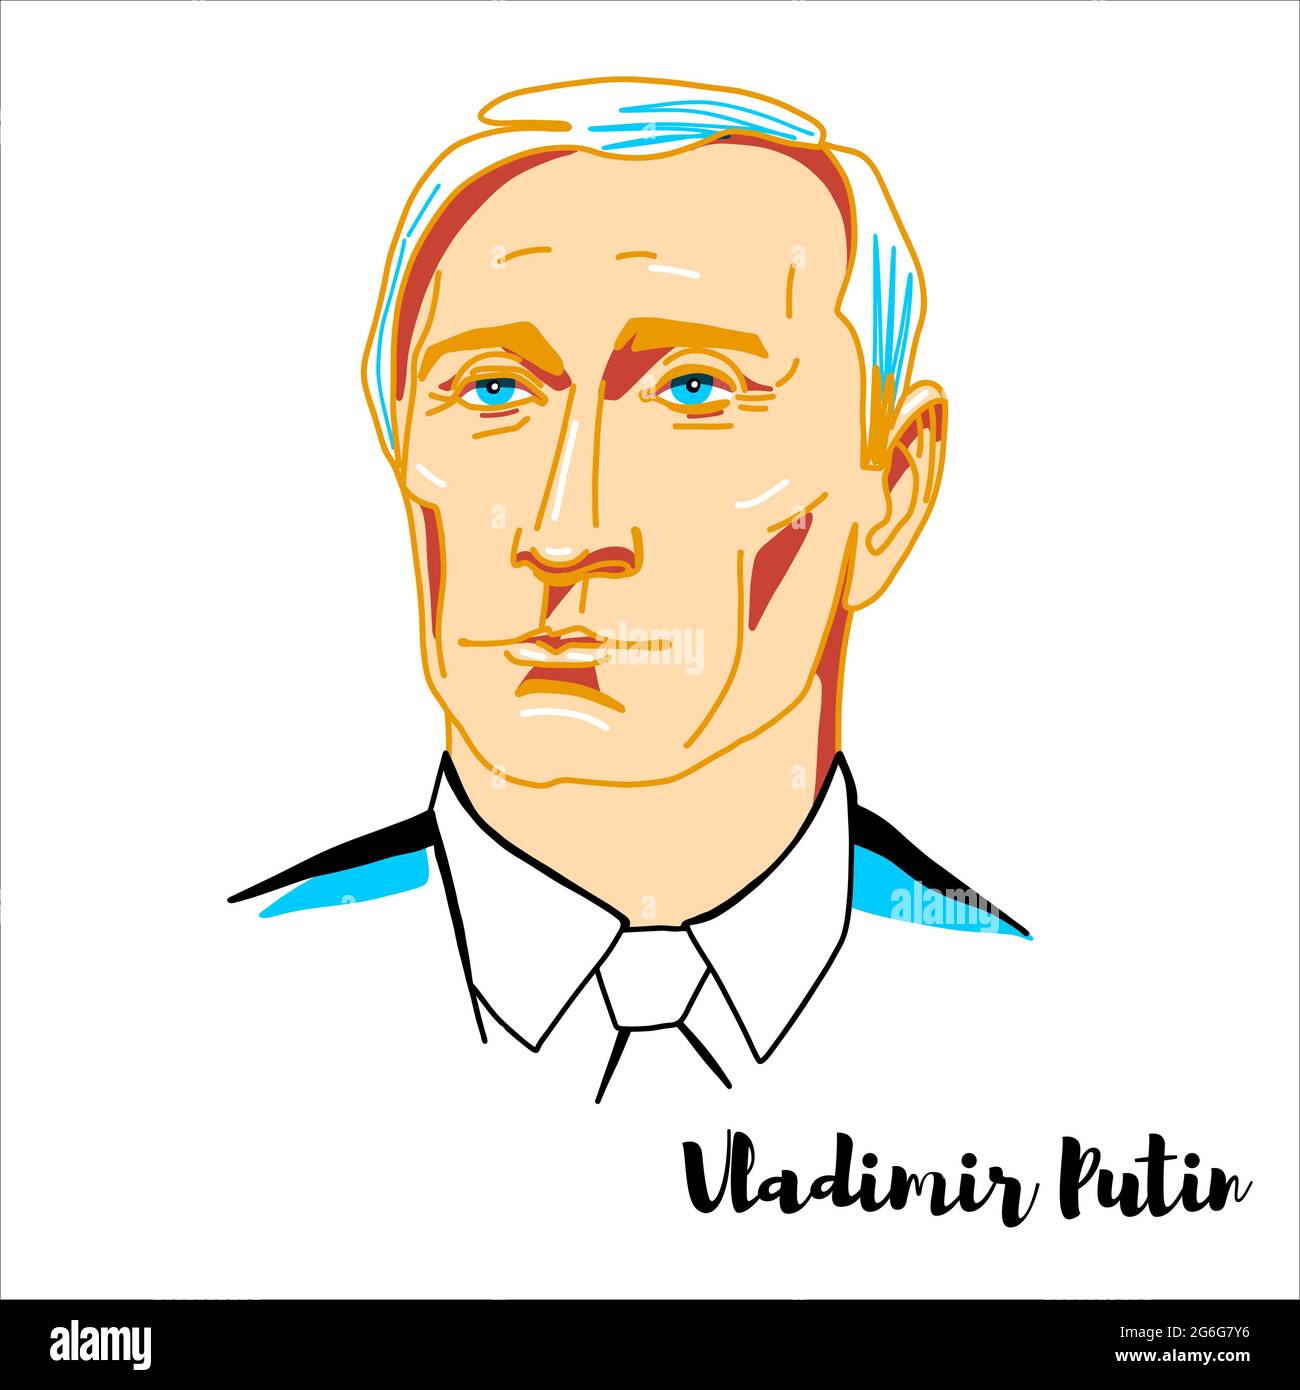 RUSSIA, MOSCOW - April, 14, 2019: Vladimir Putin engraved vector portrait with ink contours. Russian politician and former intelligence officer servin Stock Vector